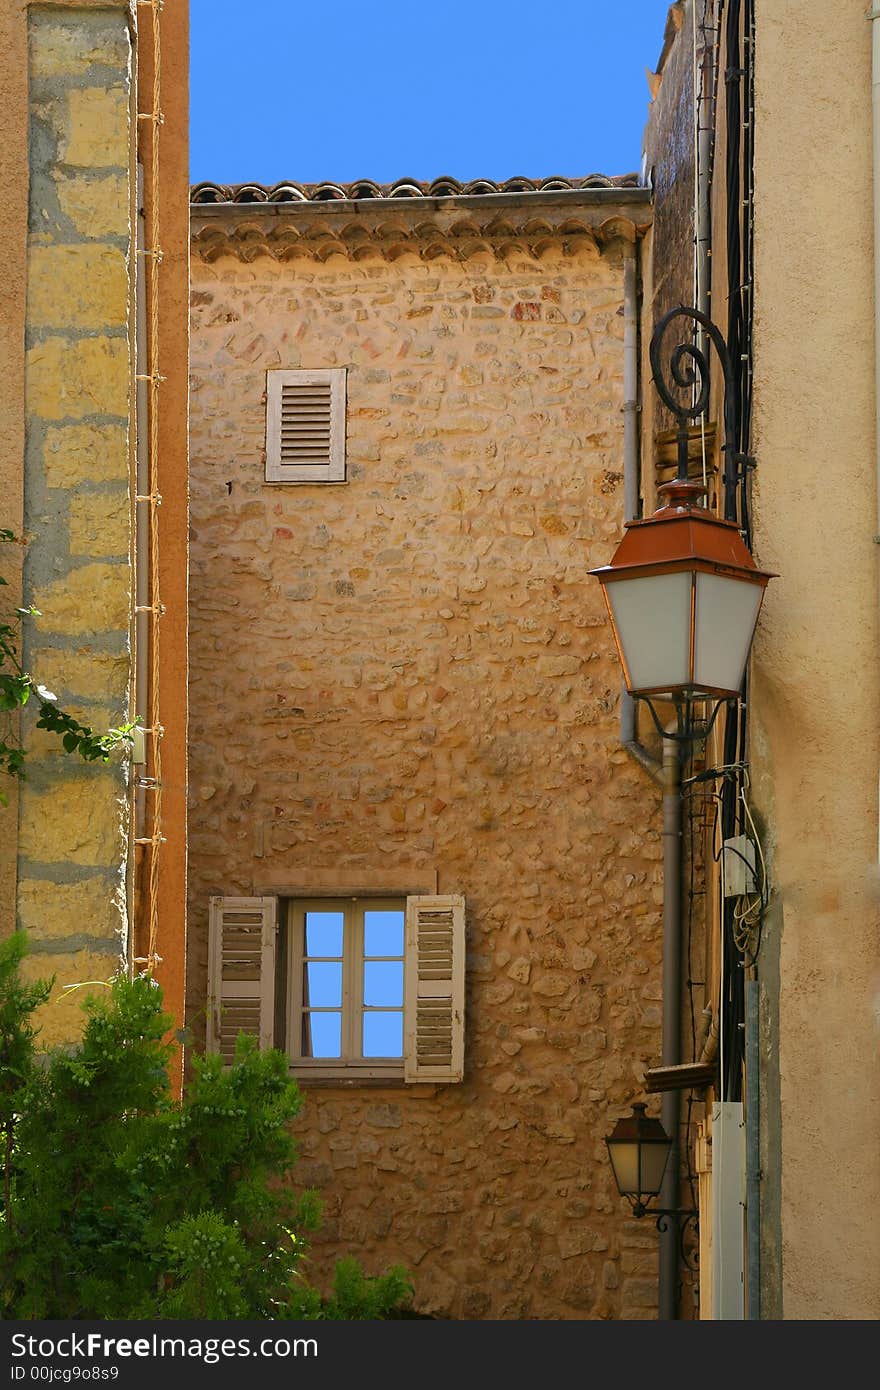 Mediterranean façades in an old village from the Middle Ages in the south of France.